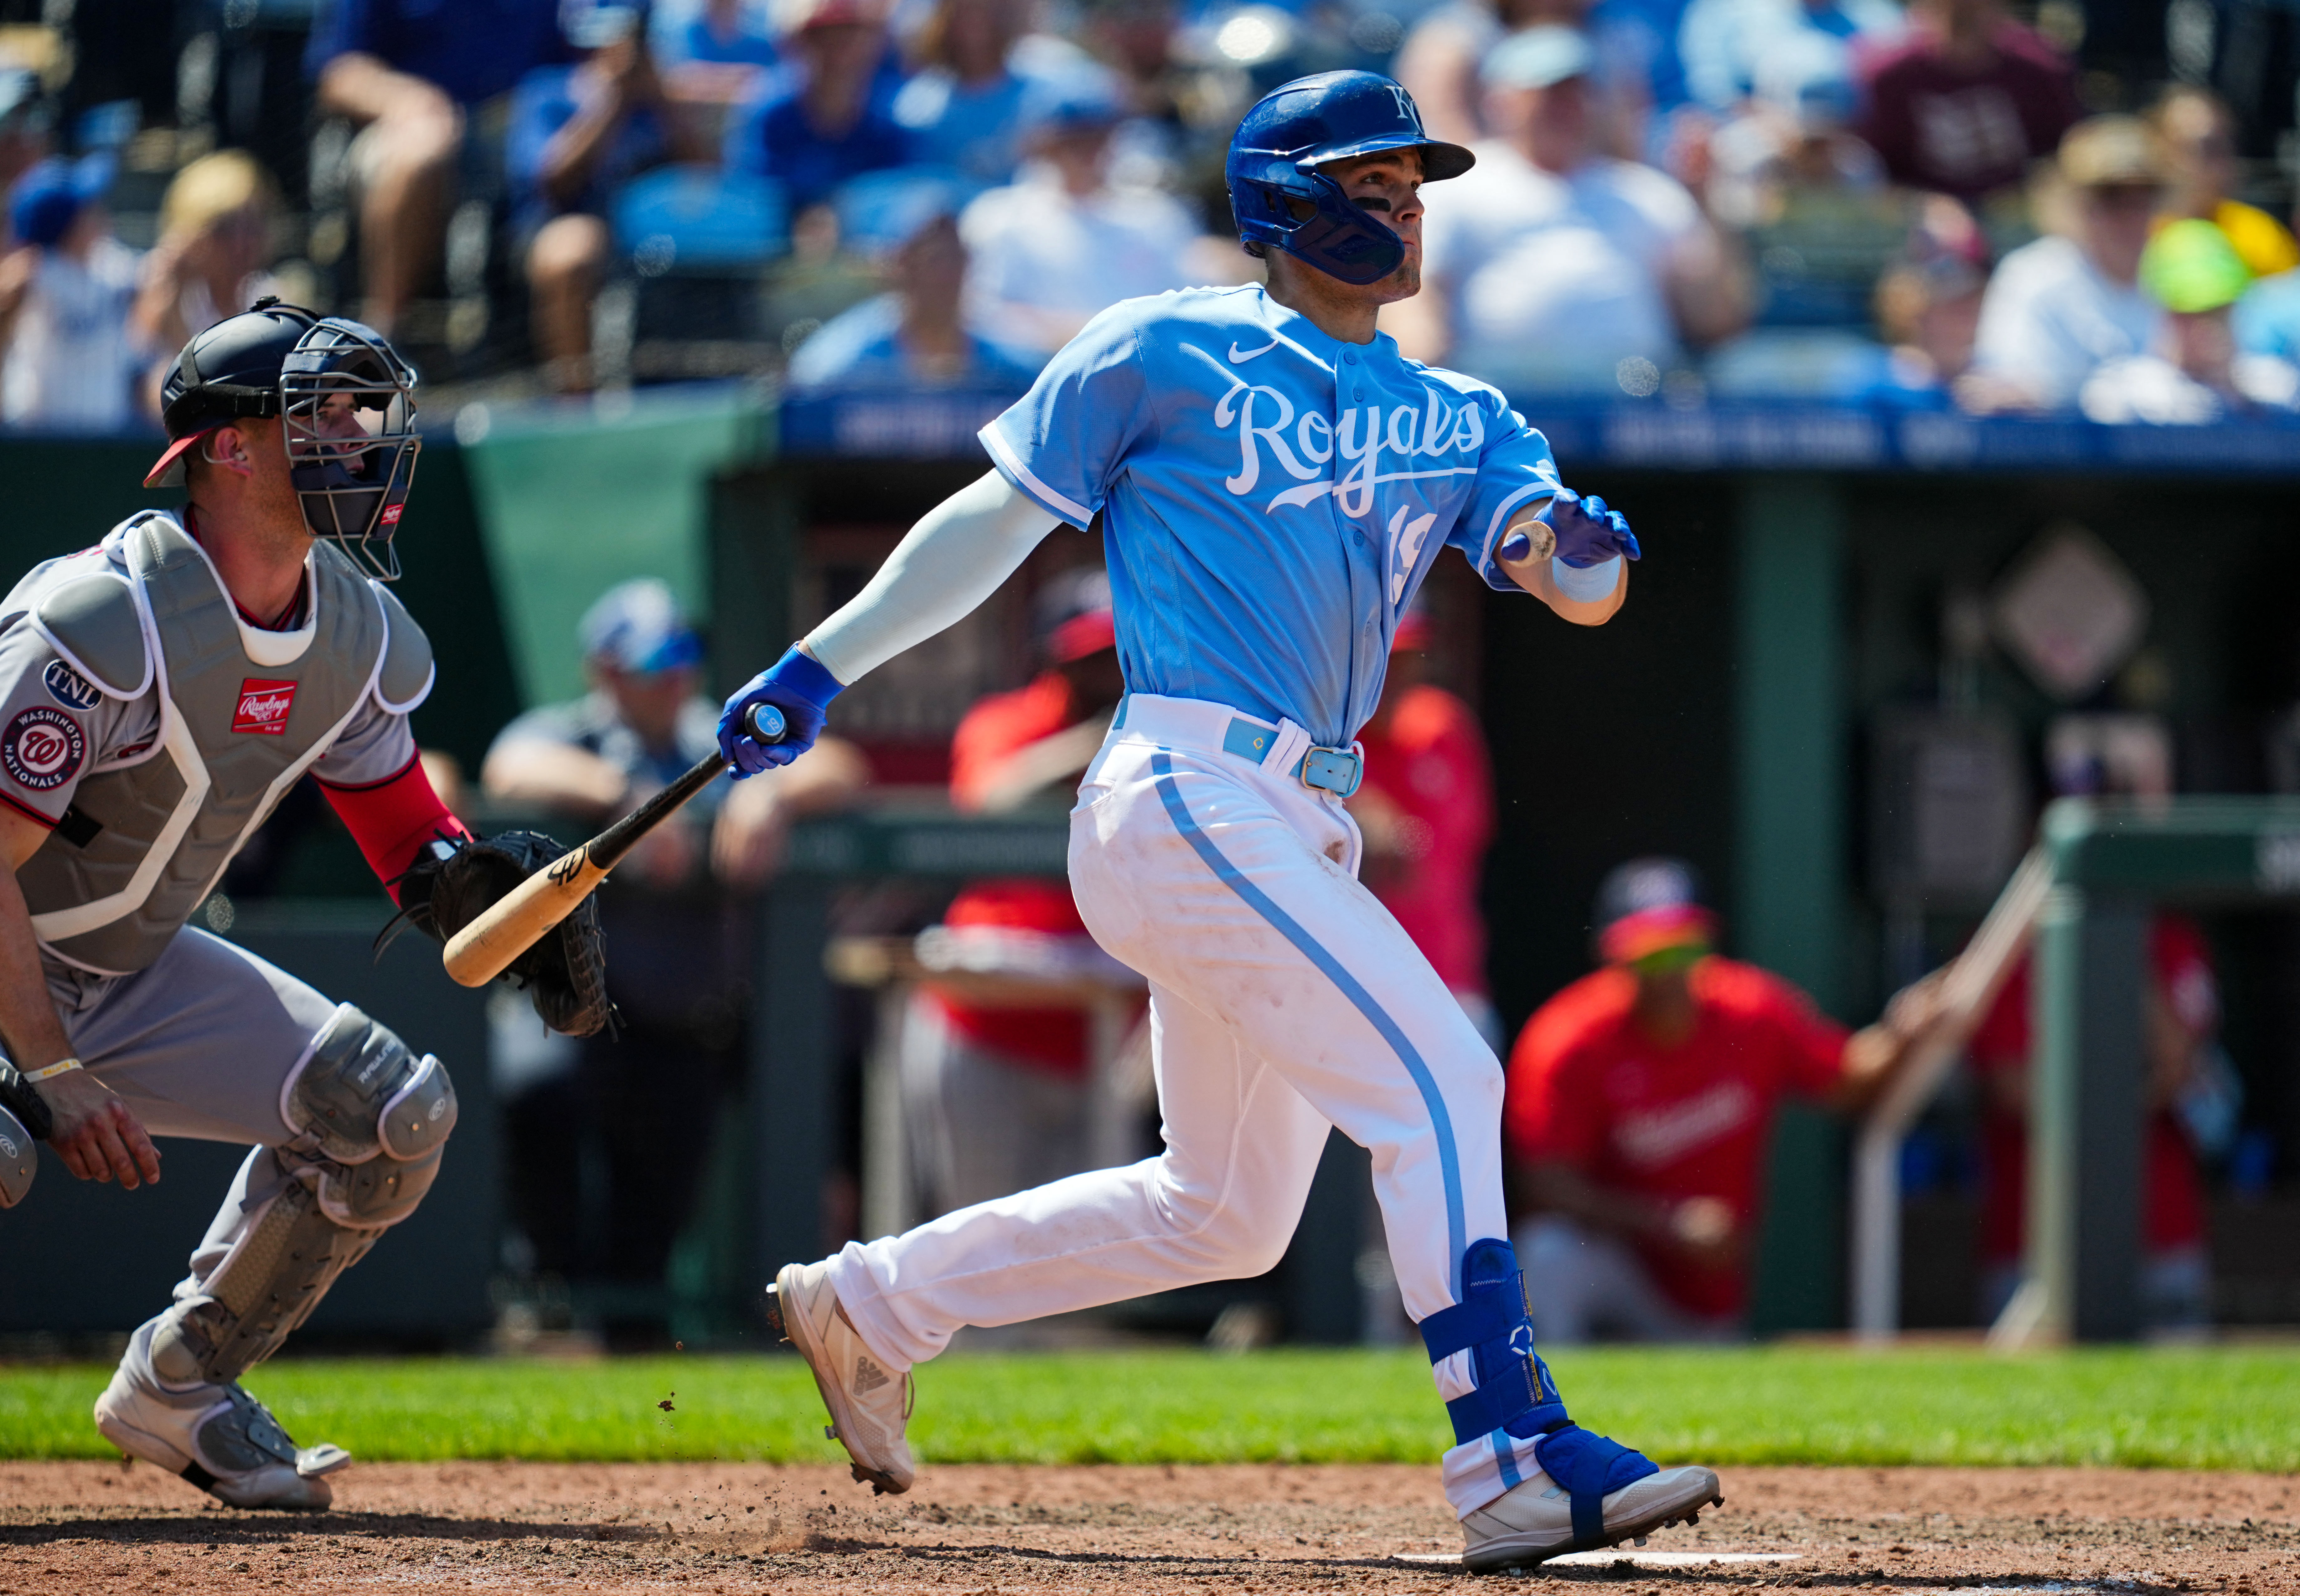 Late error helps Royals avoid sweep against Nationals